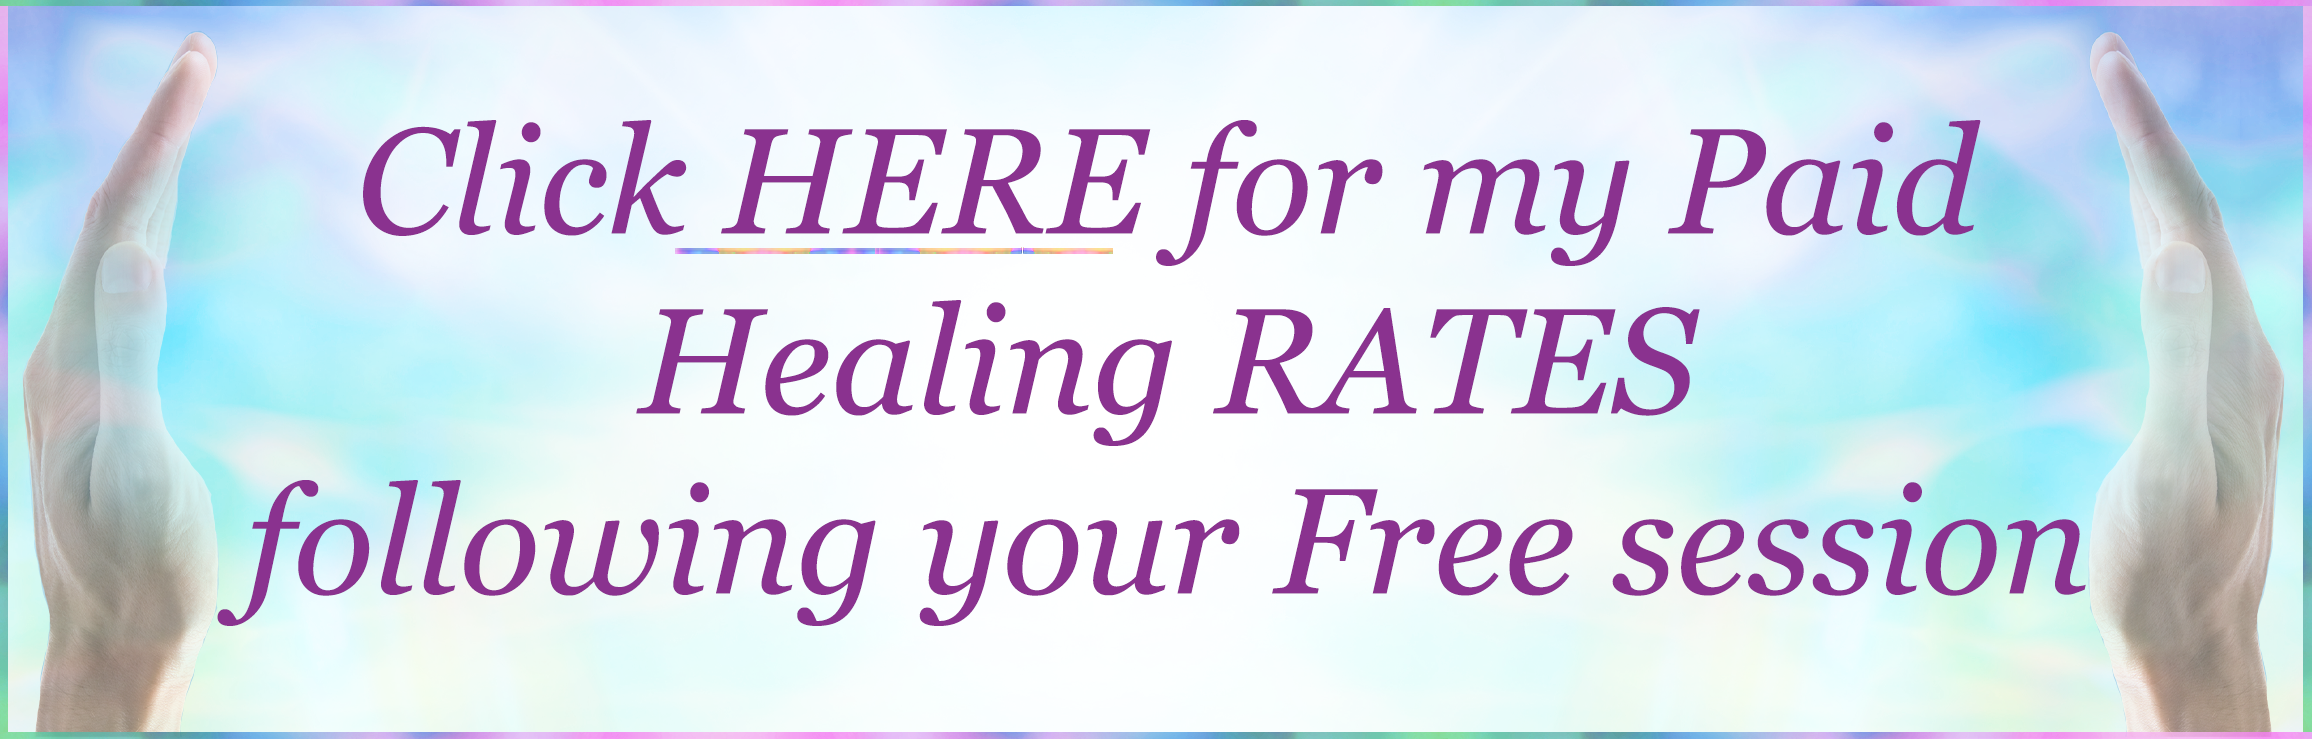 Click HERE for my Paid Healing RATES following your Free session